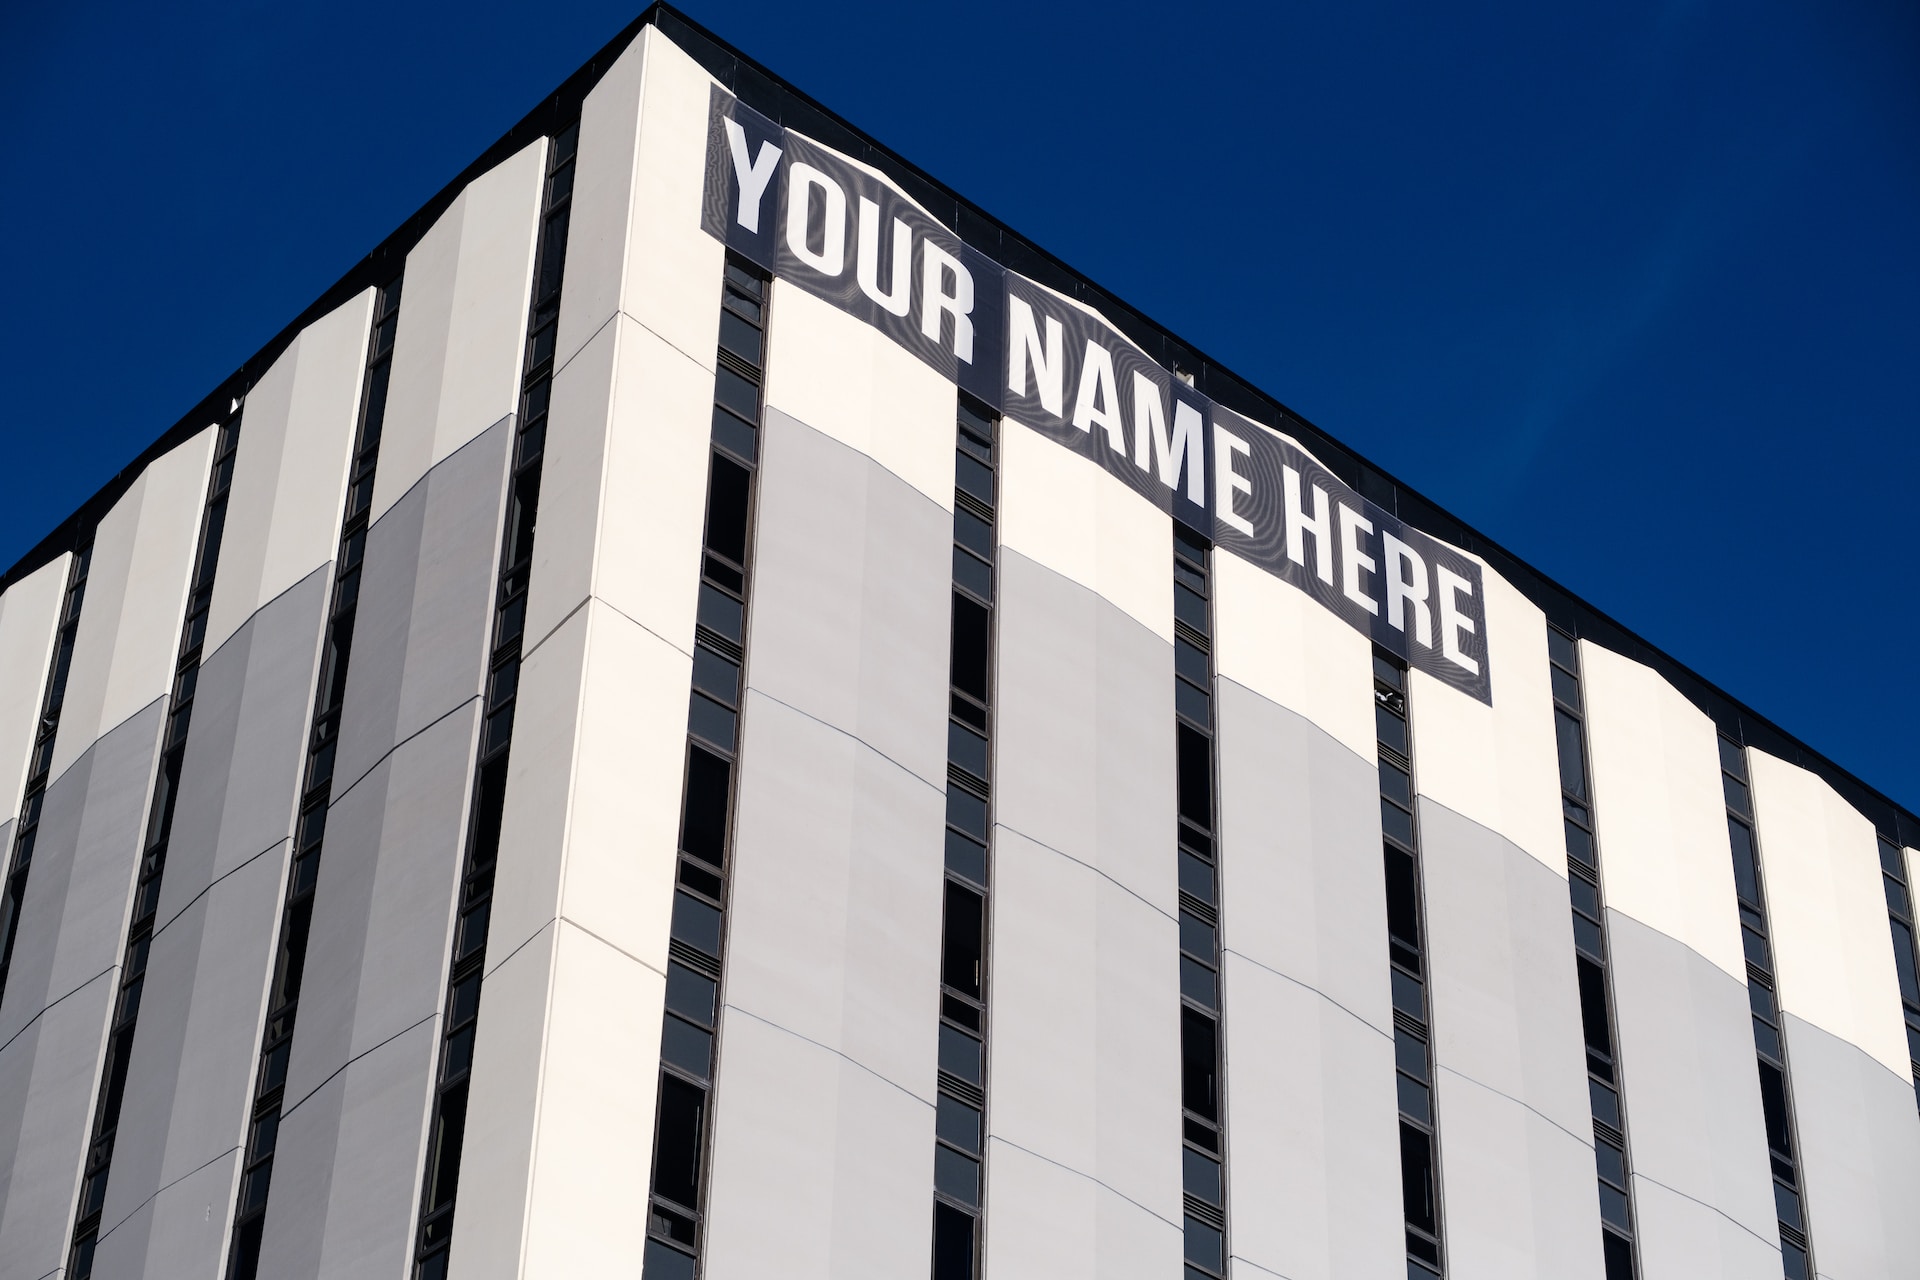 Name sign on the side of a building